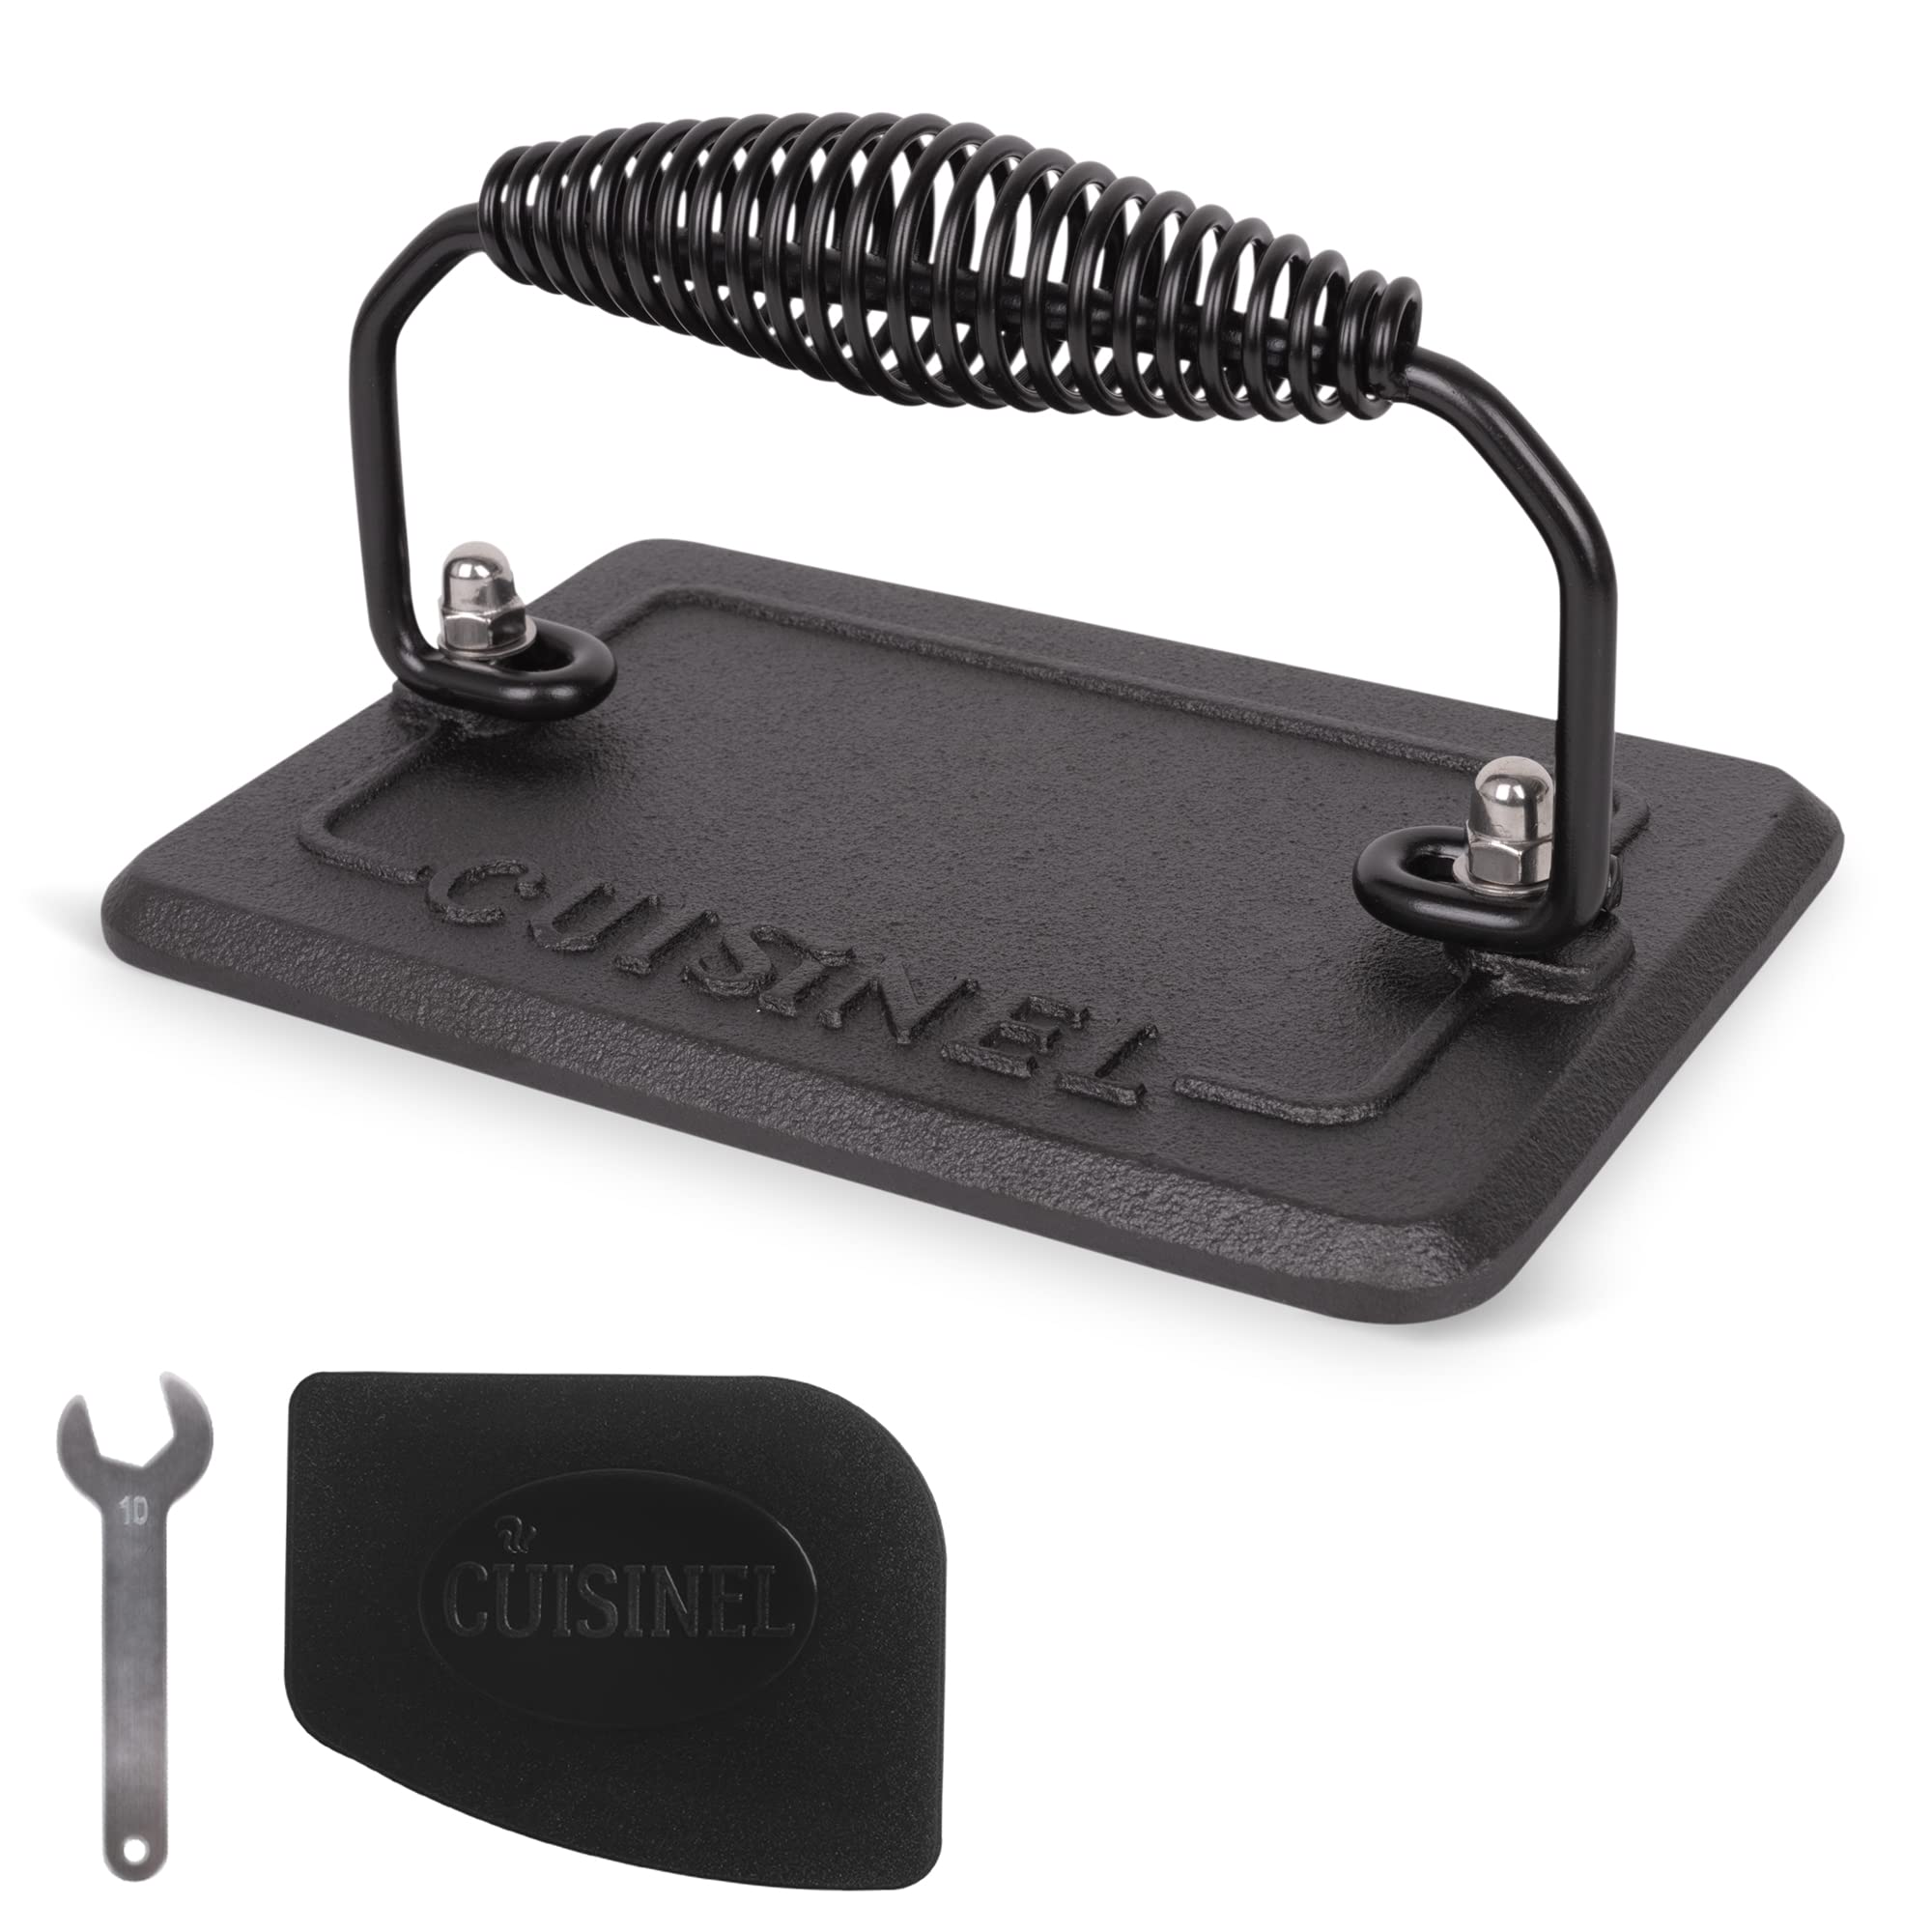 Cuisinel Cast Iron Griddle/Grill - Pre-Seasoned Reversible Blackstone Cover BBQ Accessories + Burger Hamburger Press Smasher + Pan Scraper/Cleaner for Skillets Frying Pans - Indoor/Outdoor  - Acceptable